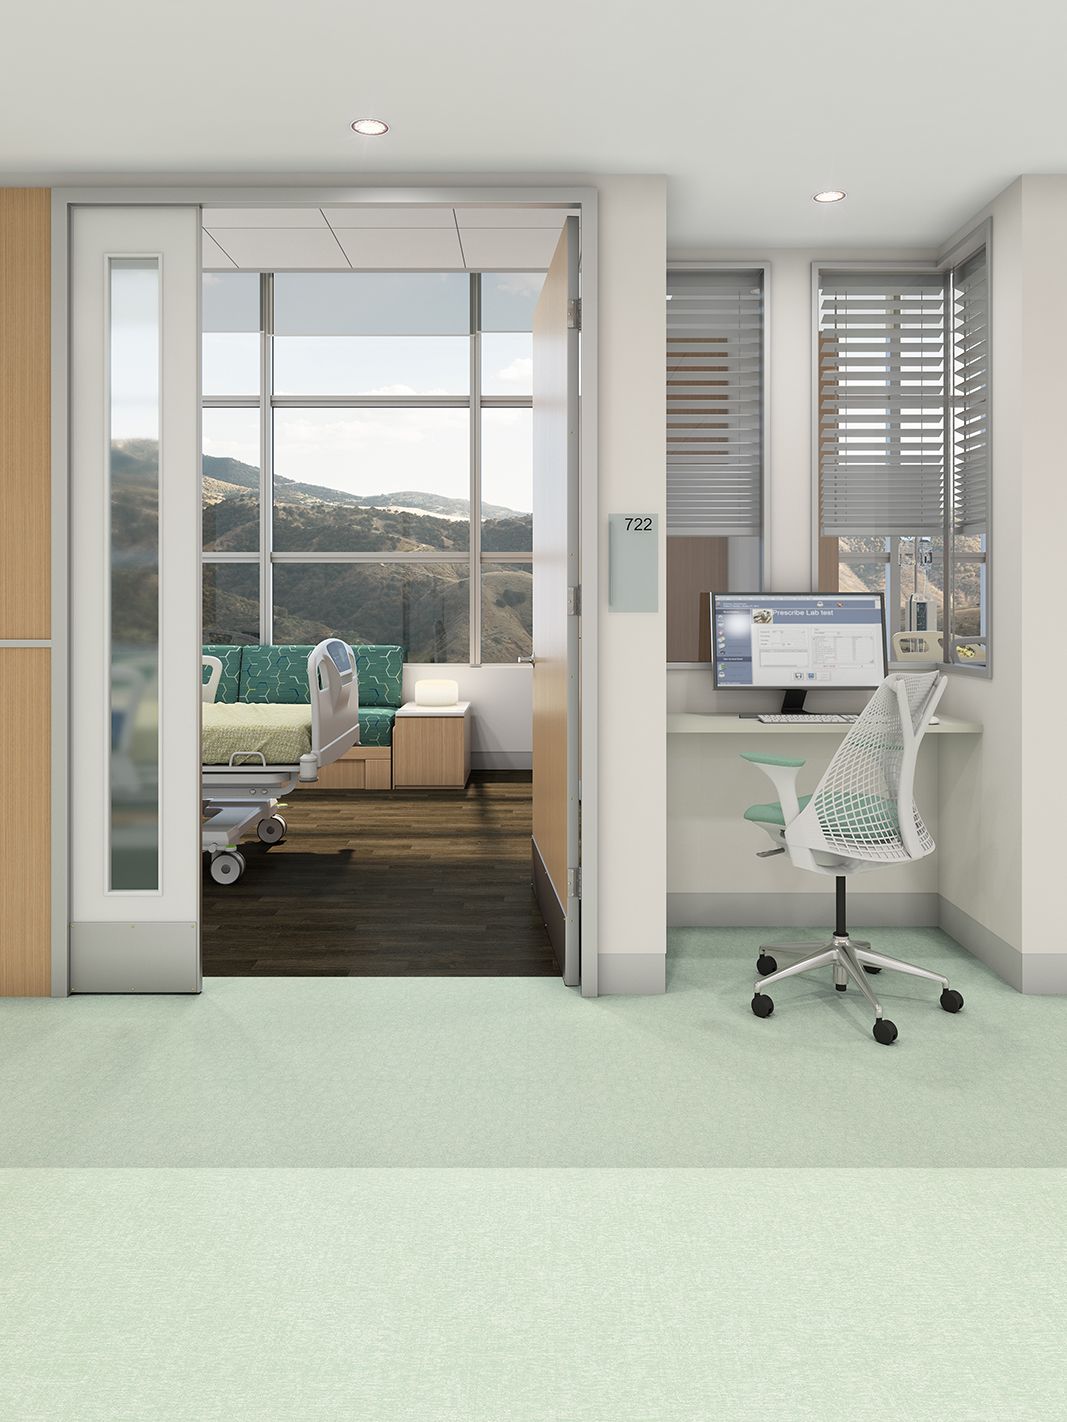 Interface's Spike-tacular, Bloom with a View and Continual Woodgrains vinyl sheet in hospital corridor and patient room imagen número 7